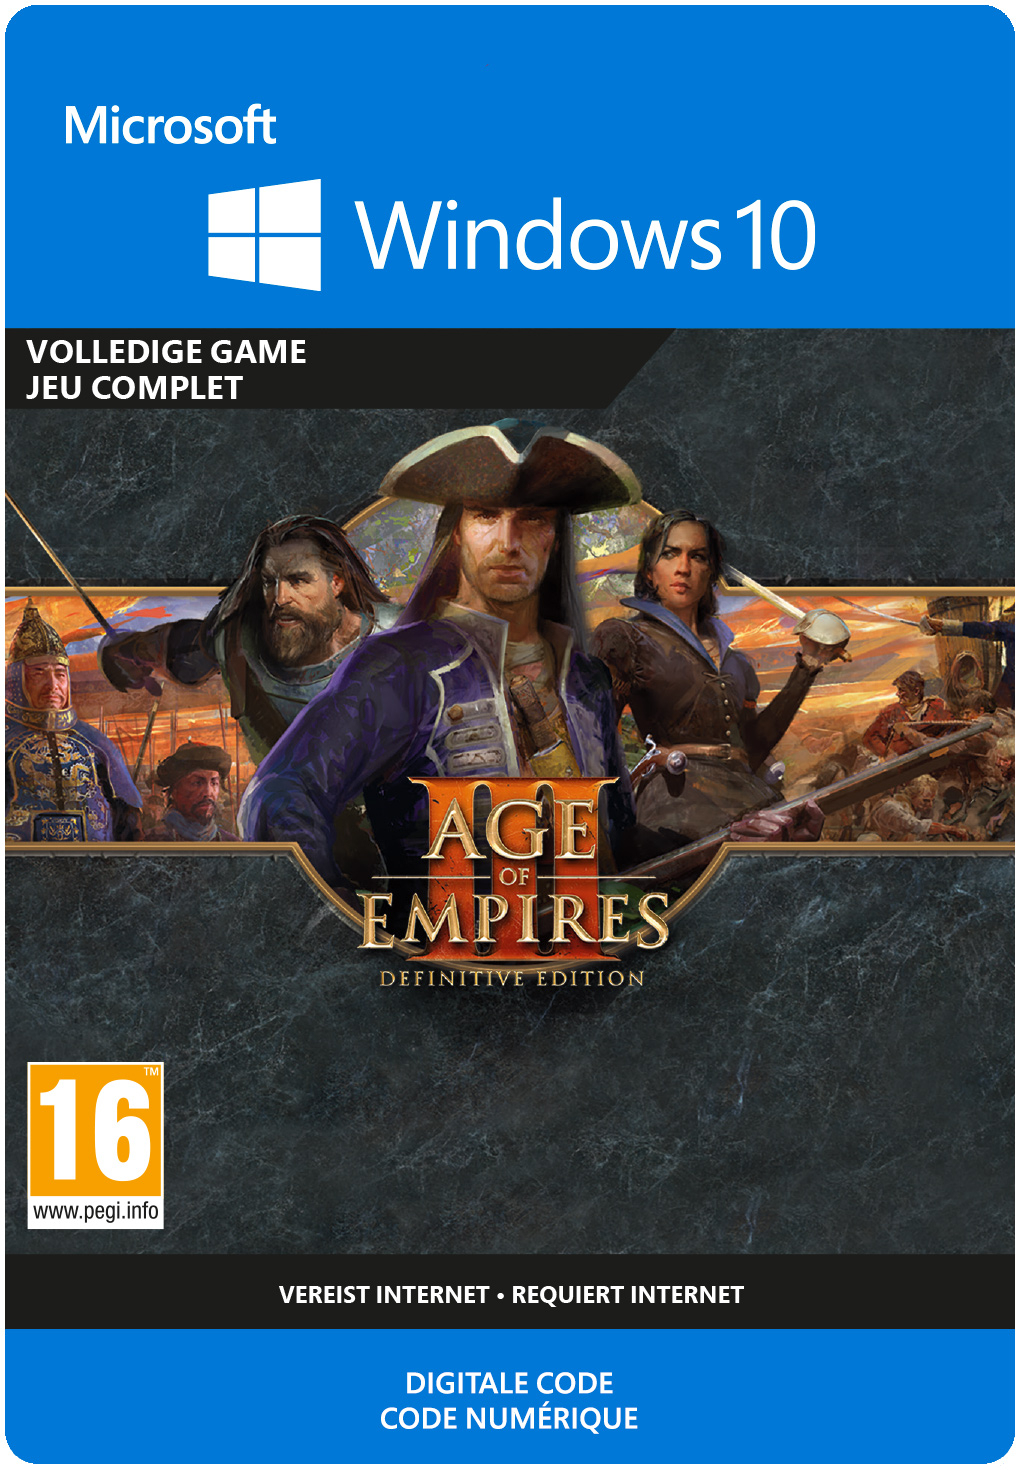 Age of Empires 3: Definitive Edition - PC (Digitale Game) GamesDirect®